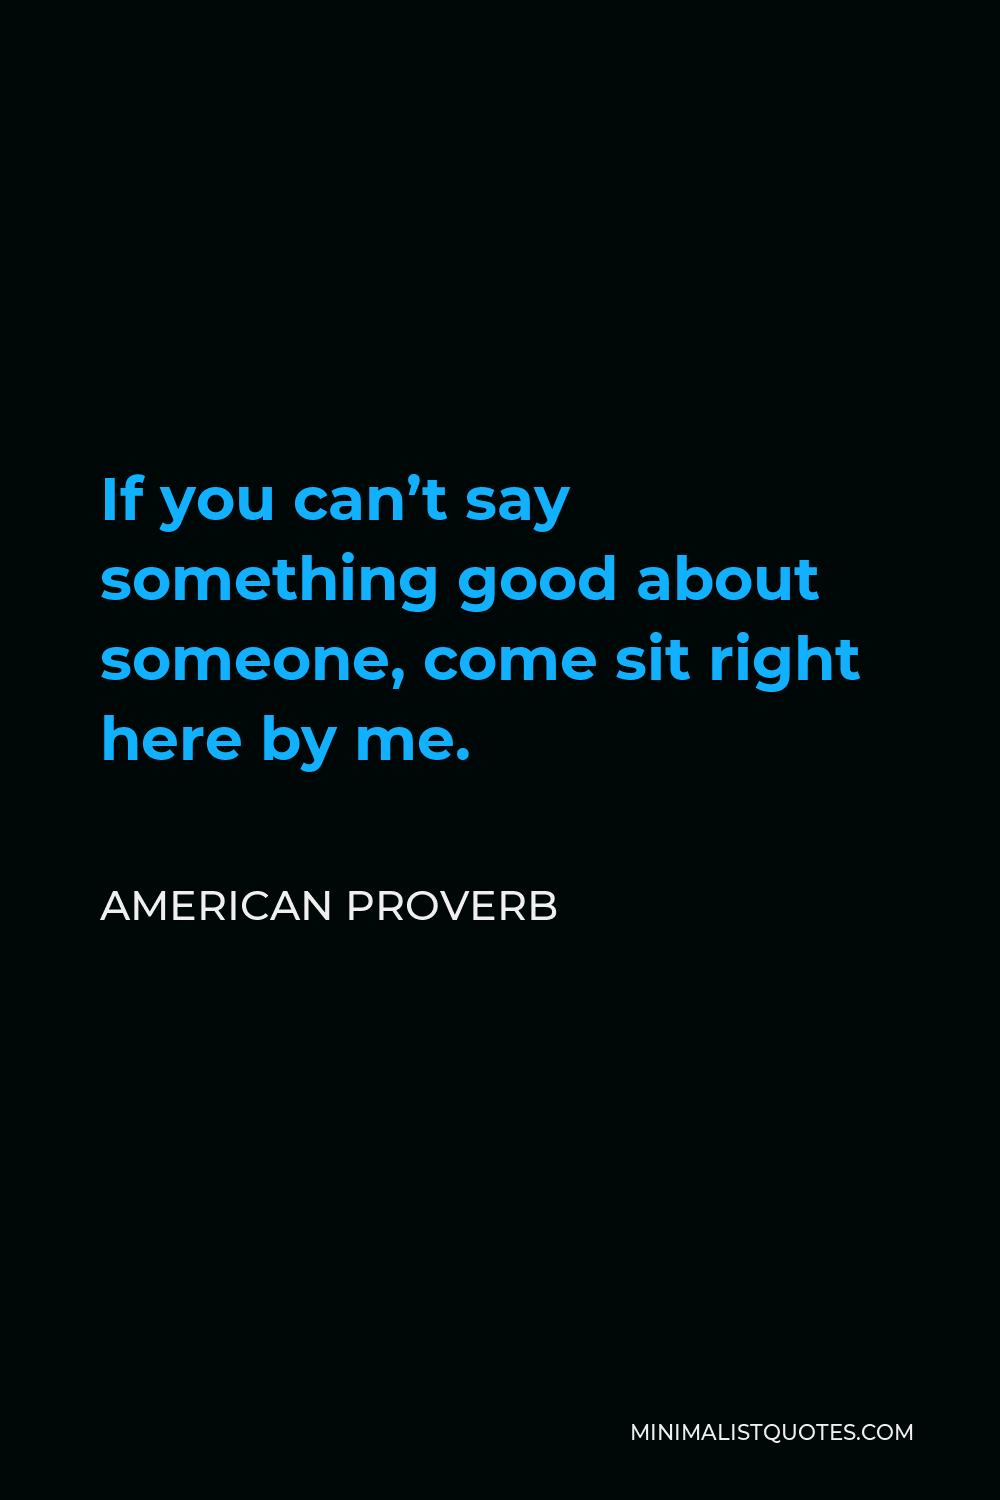 American Proverb Quote - If you can’t say something good about someone, come sit right here by me.